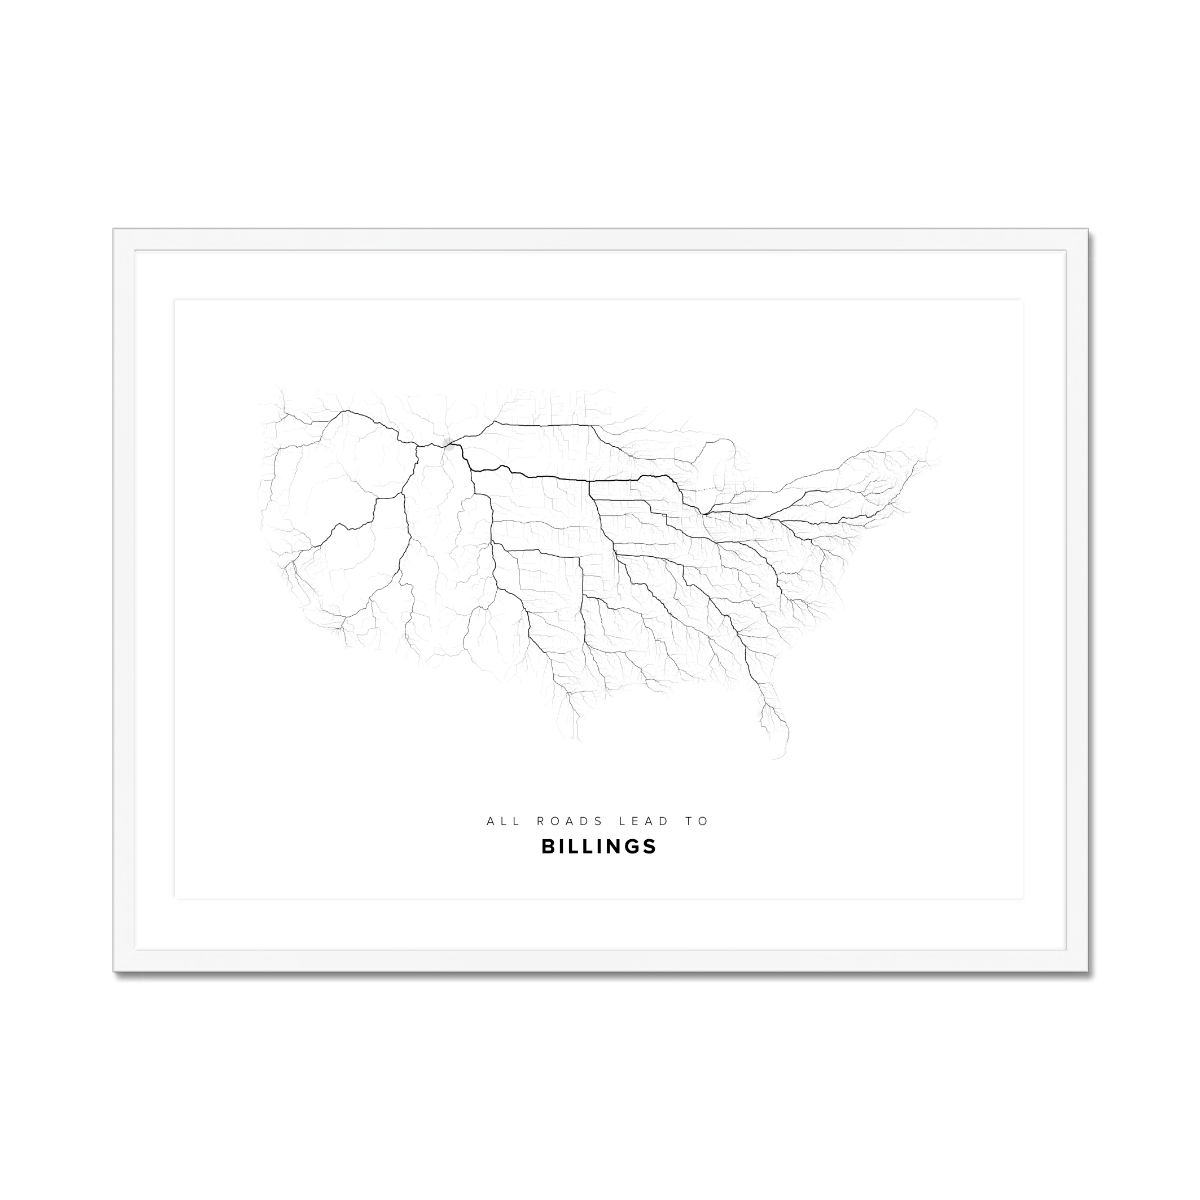 All roads lead to Billings (United States of America) Fine Art Map Print